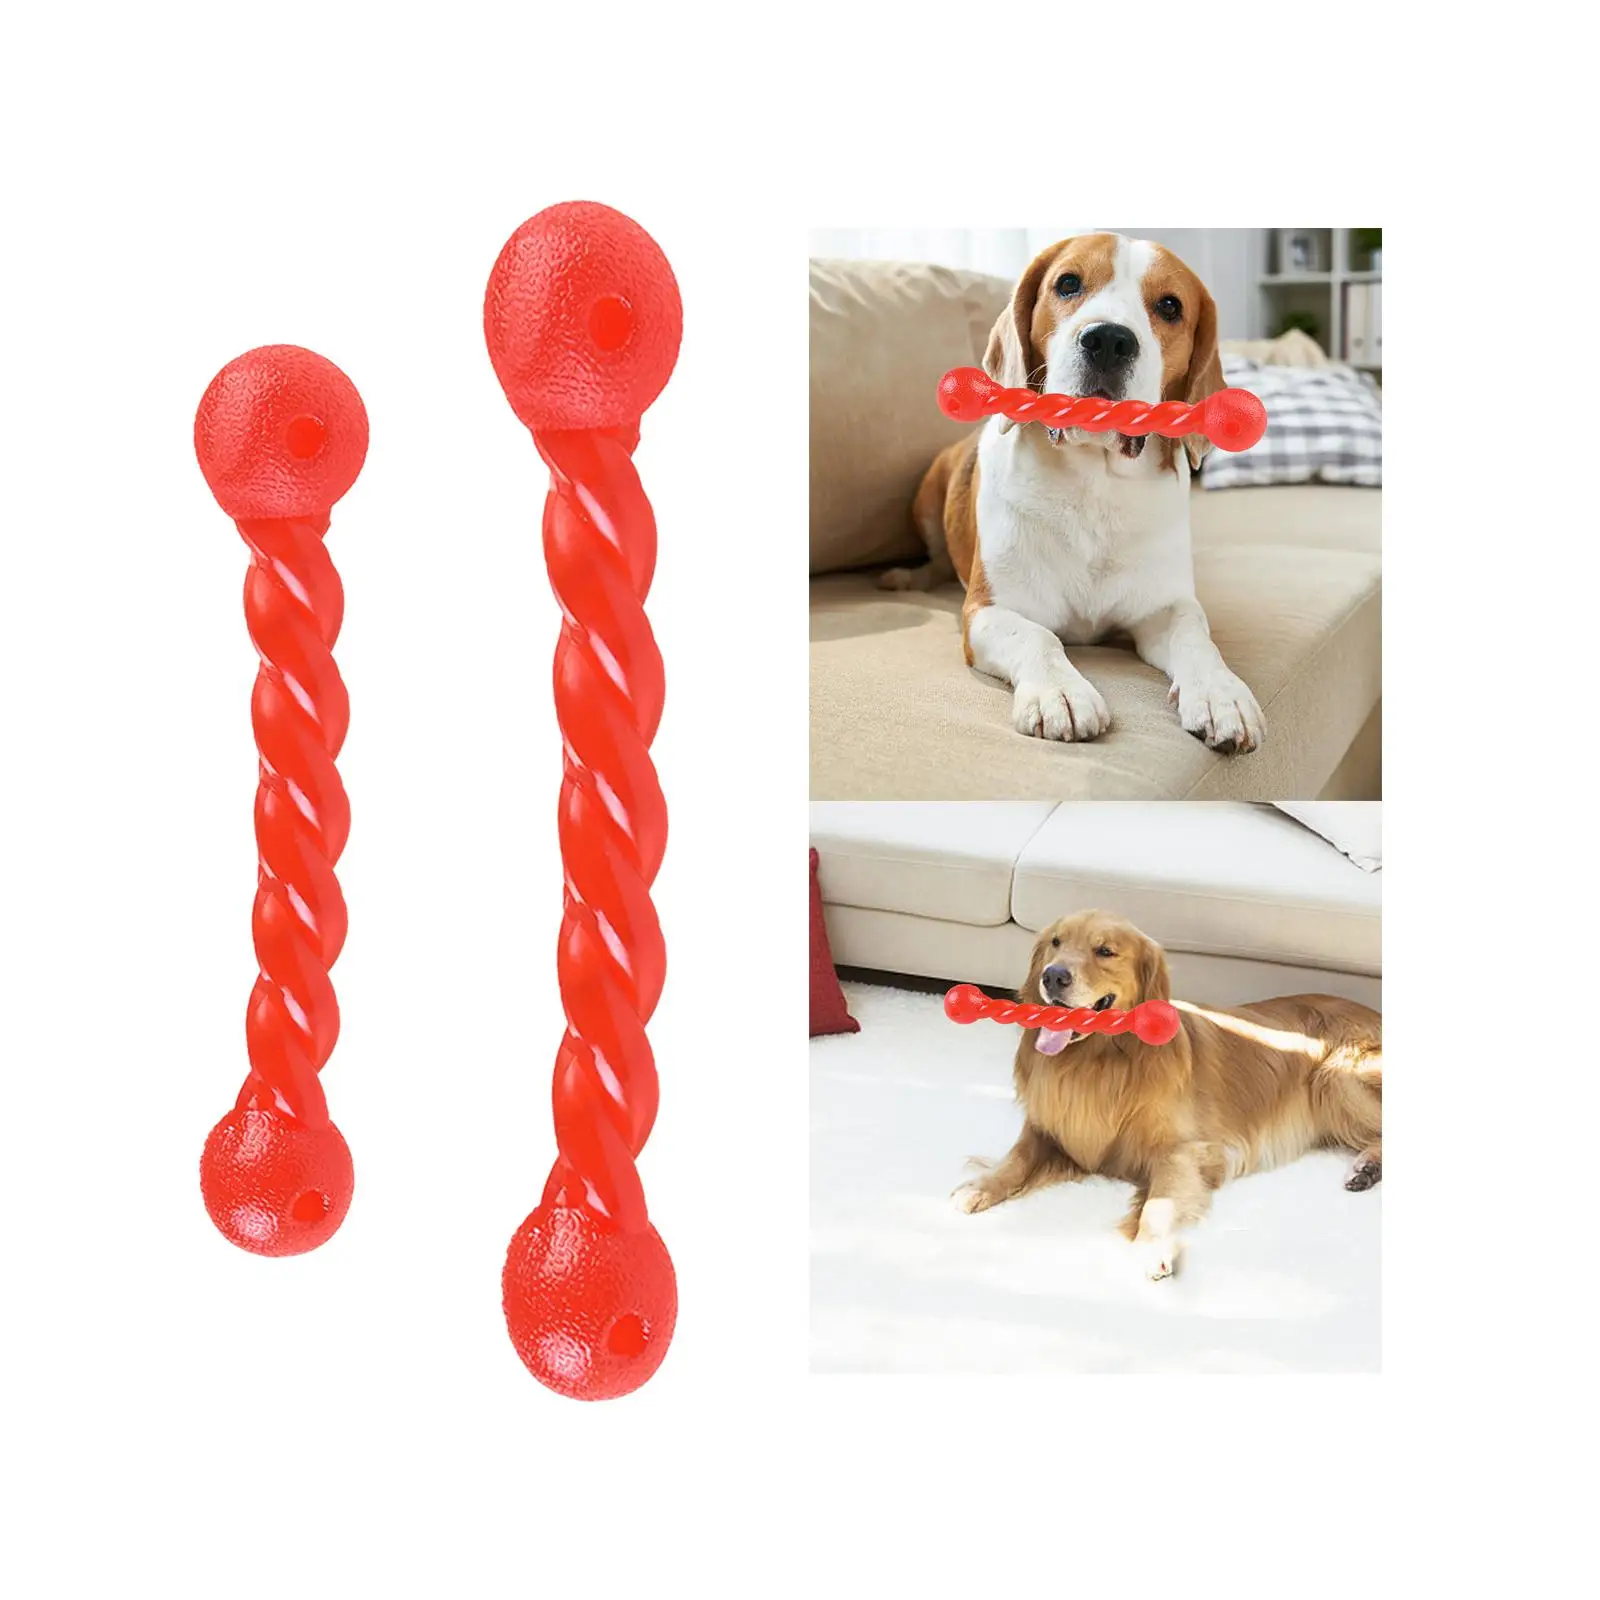 Dog Chew Toys Aggressive Chewers Rubber for Puppy Playing Doggy Supplies